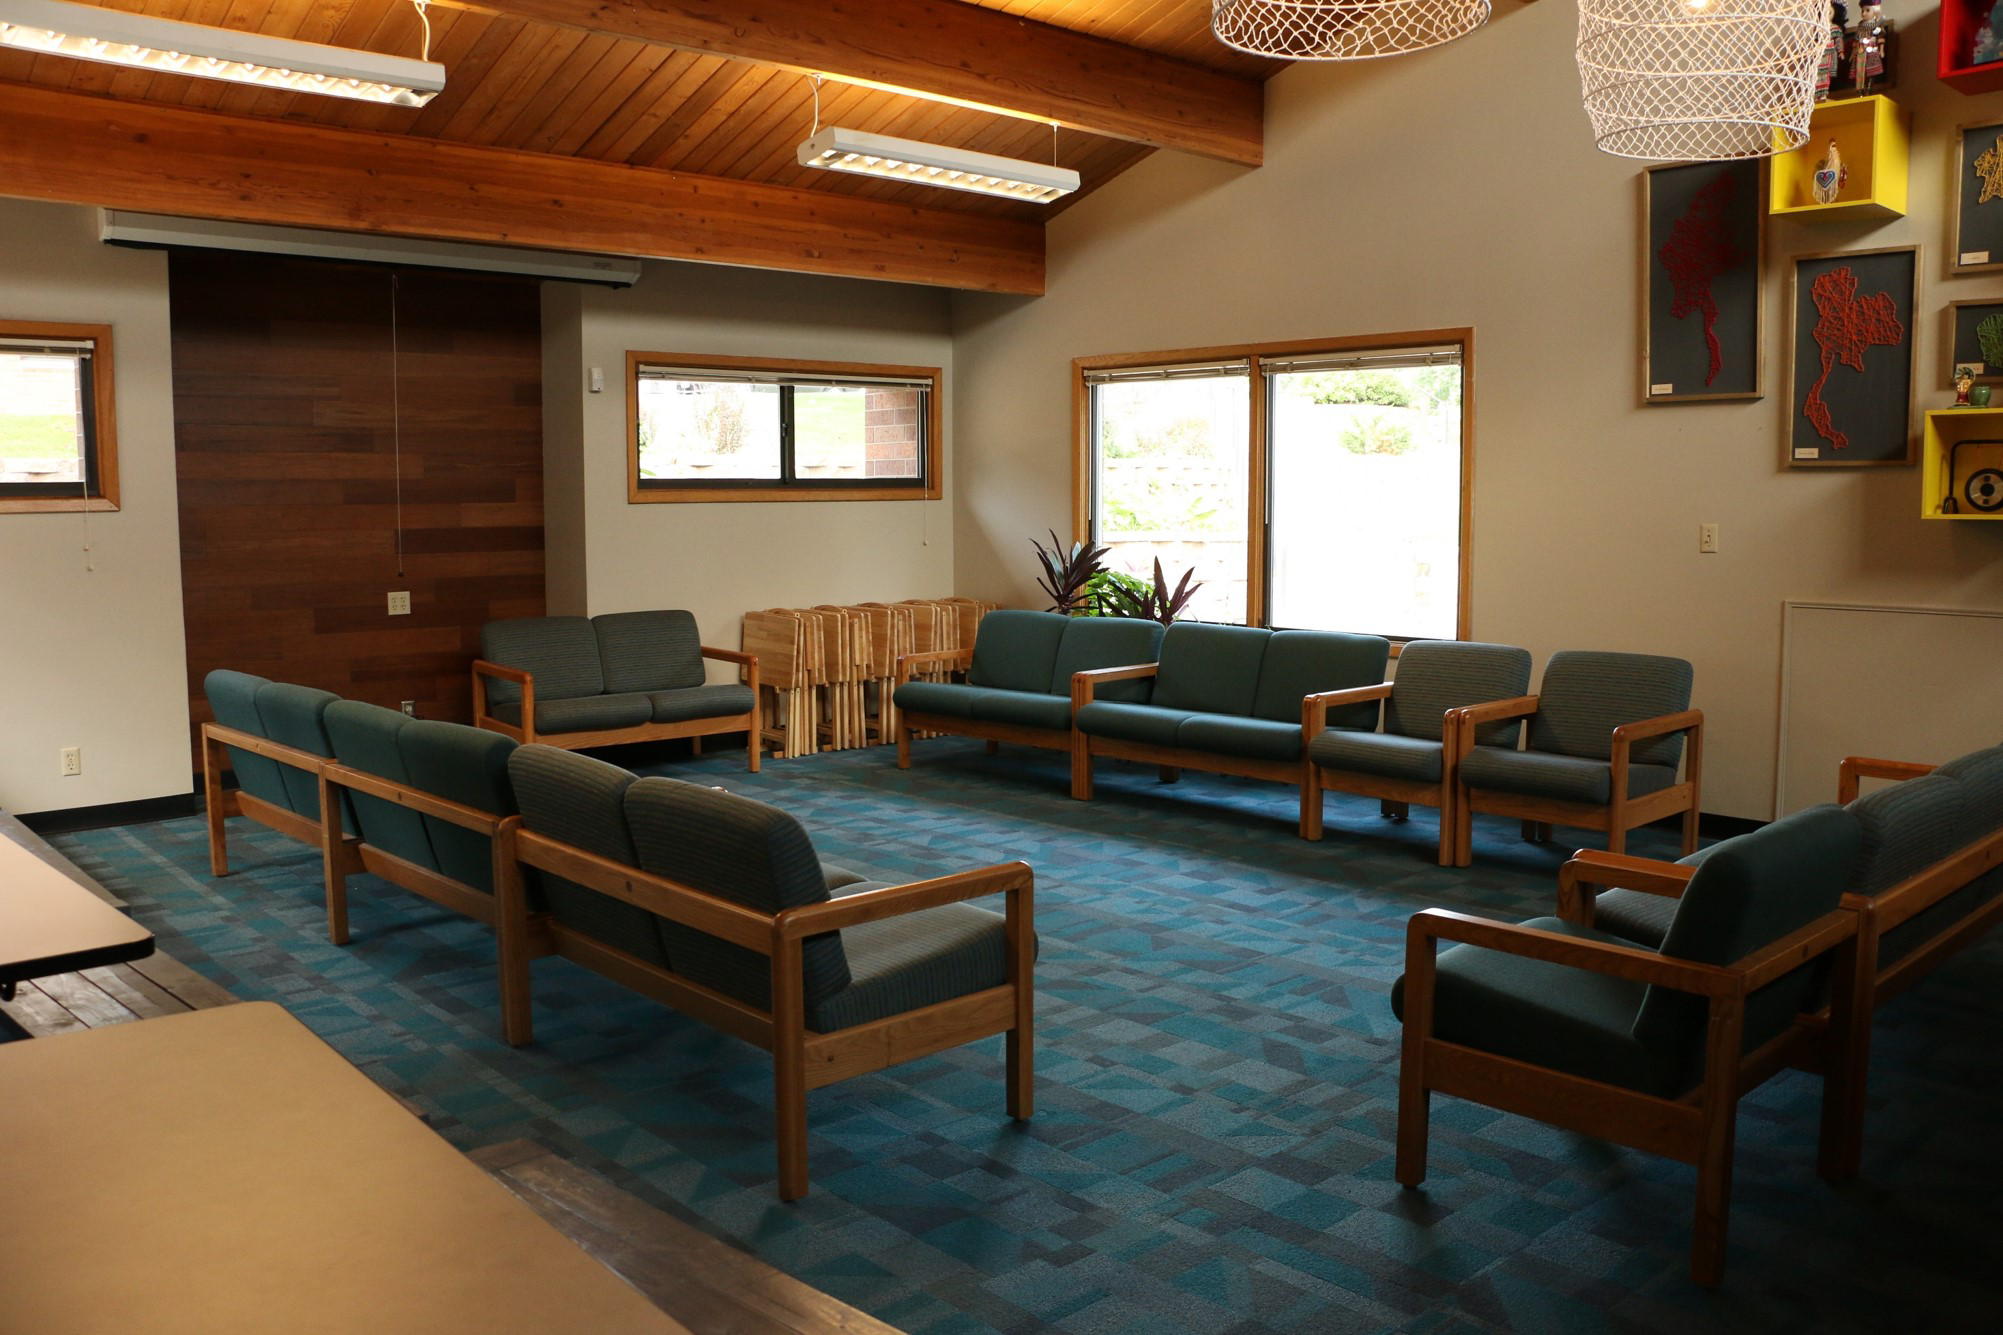 Transformed gathering space at Wilder Center for Social Healing